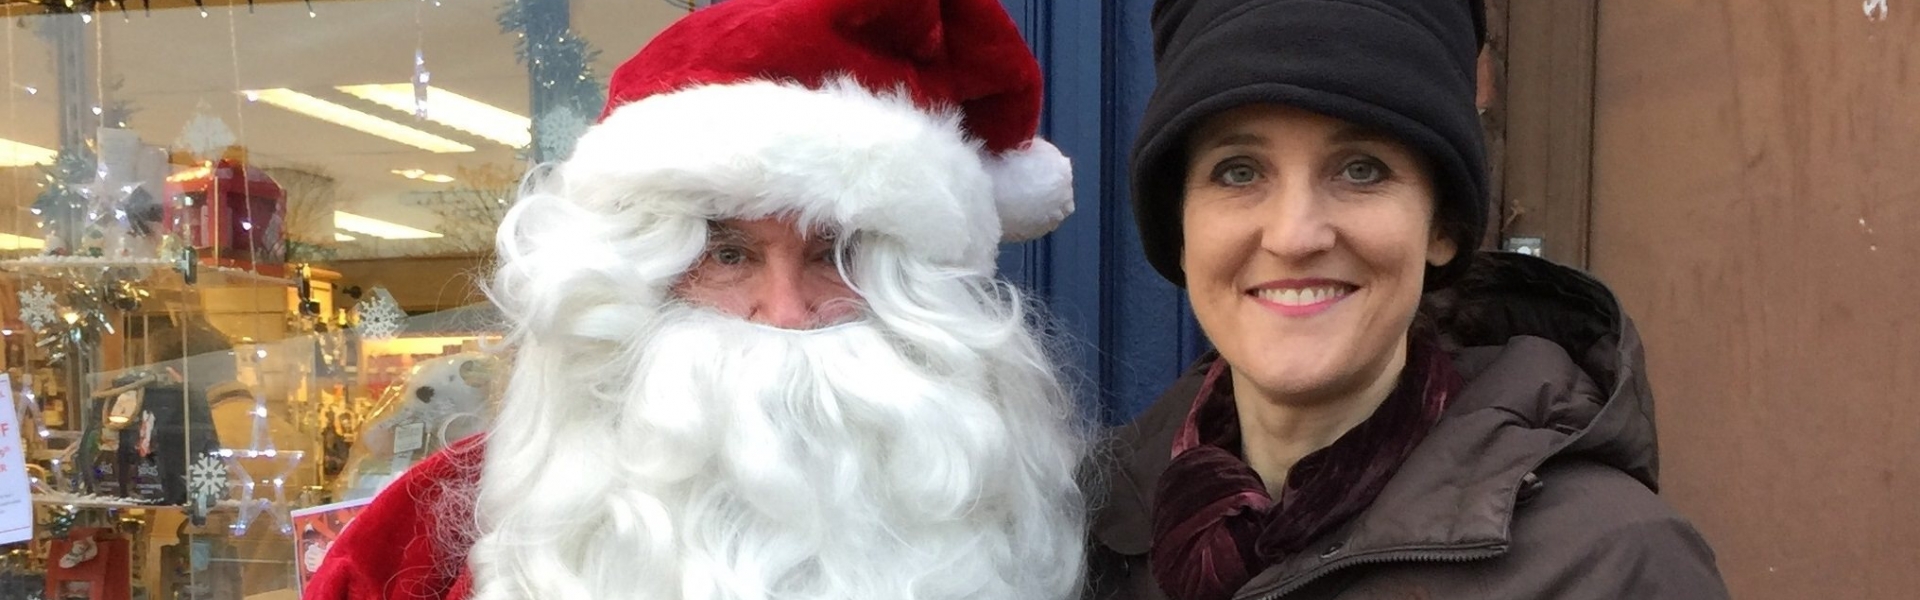 Christmas in East Barnet with Theresa Villiers and Father Christmas